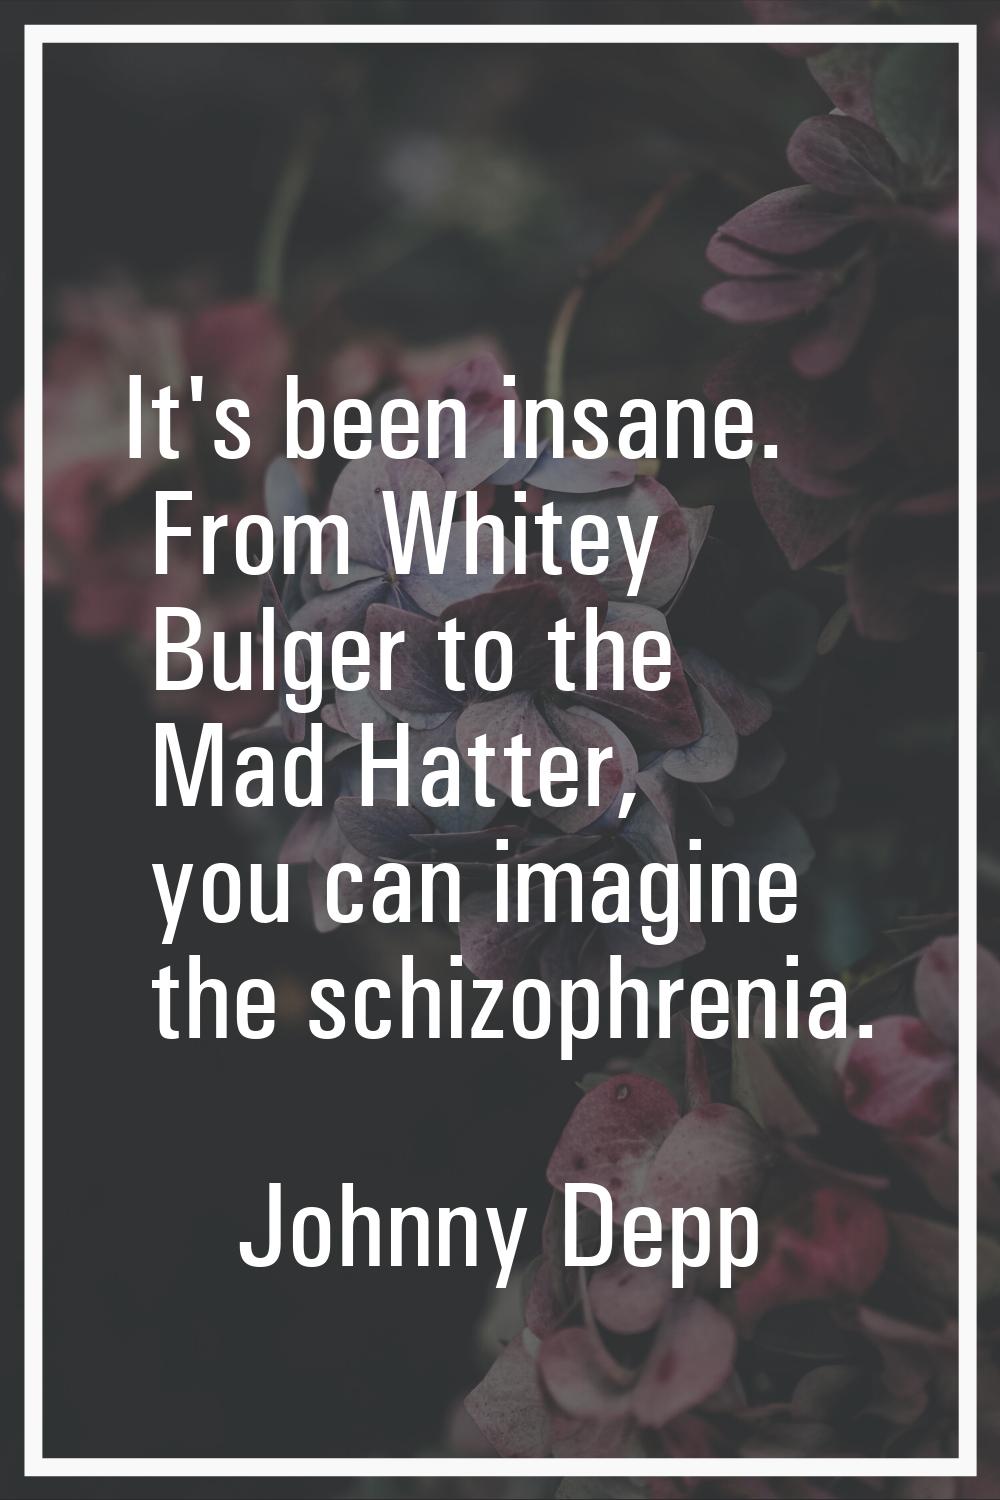 It's been insane. From Whitey Bulger to the Mad Hatter, you can imagine the schizophrenia.